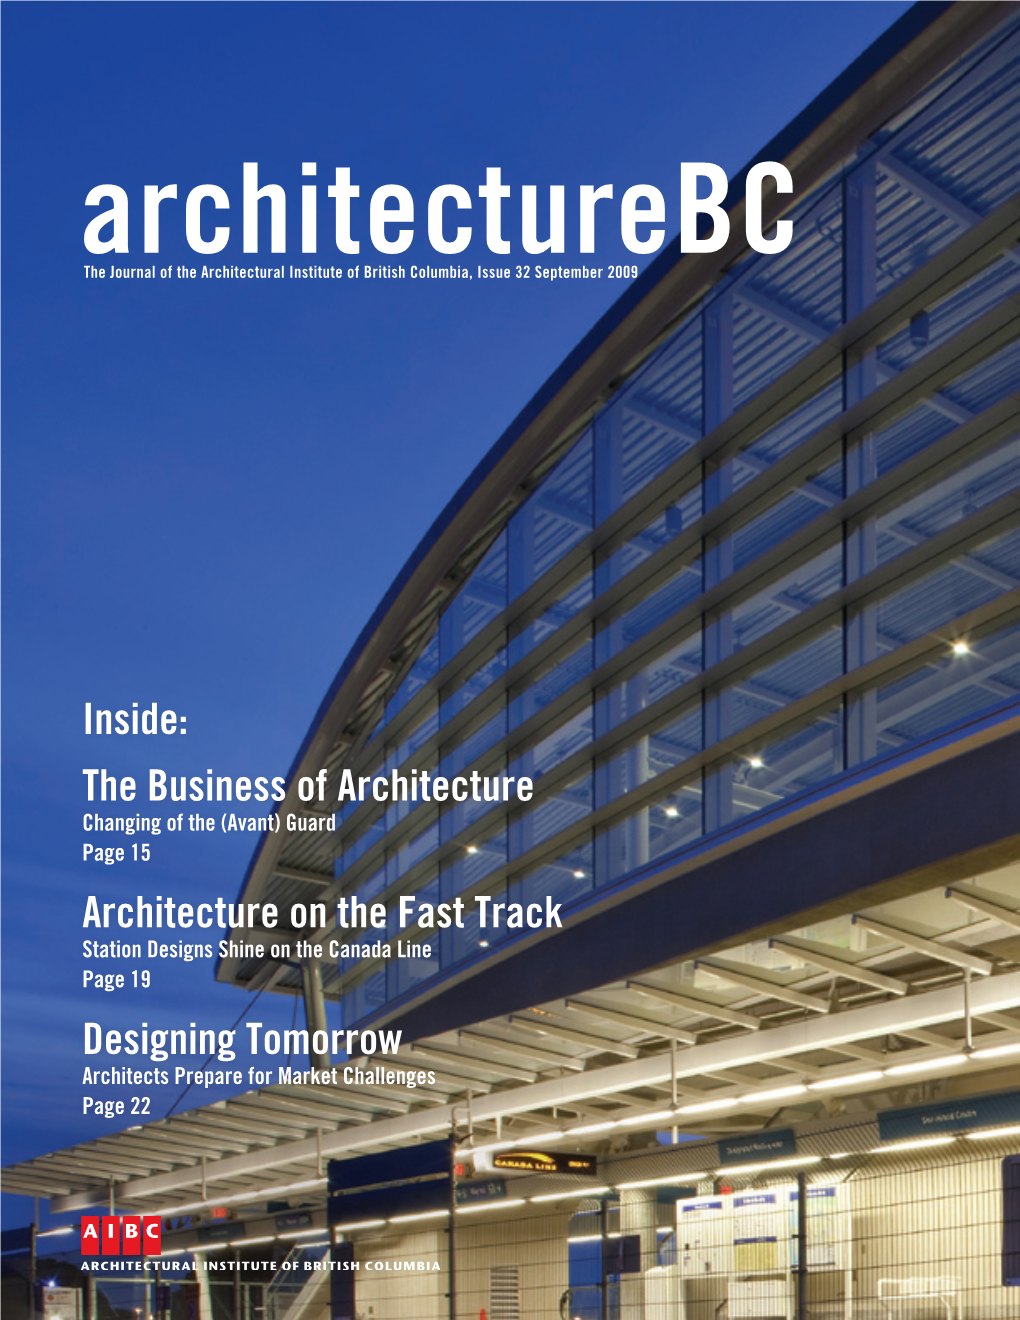 Architecturebc the Journal of the Architectural Institute of British Columbia, Issue 32 September 2009